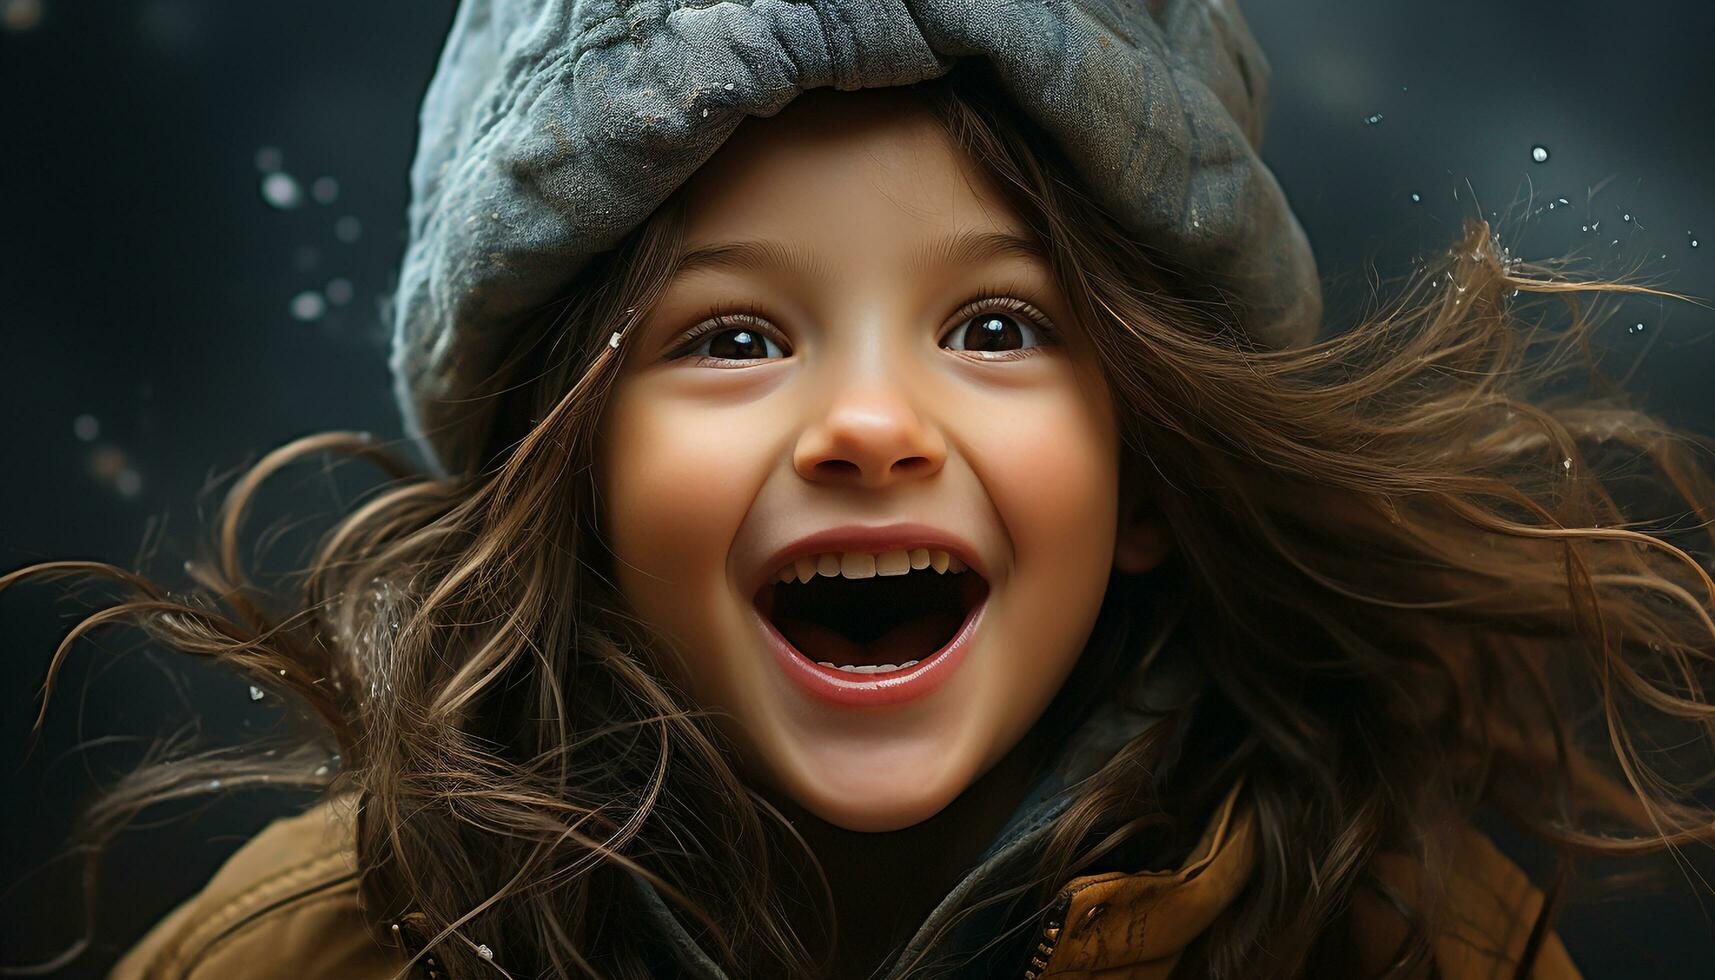 Smiling, cheerful, happiness, portrait, cute, caucasian ethnicity, child, joy, beauty generated by AI photo